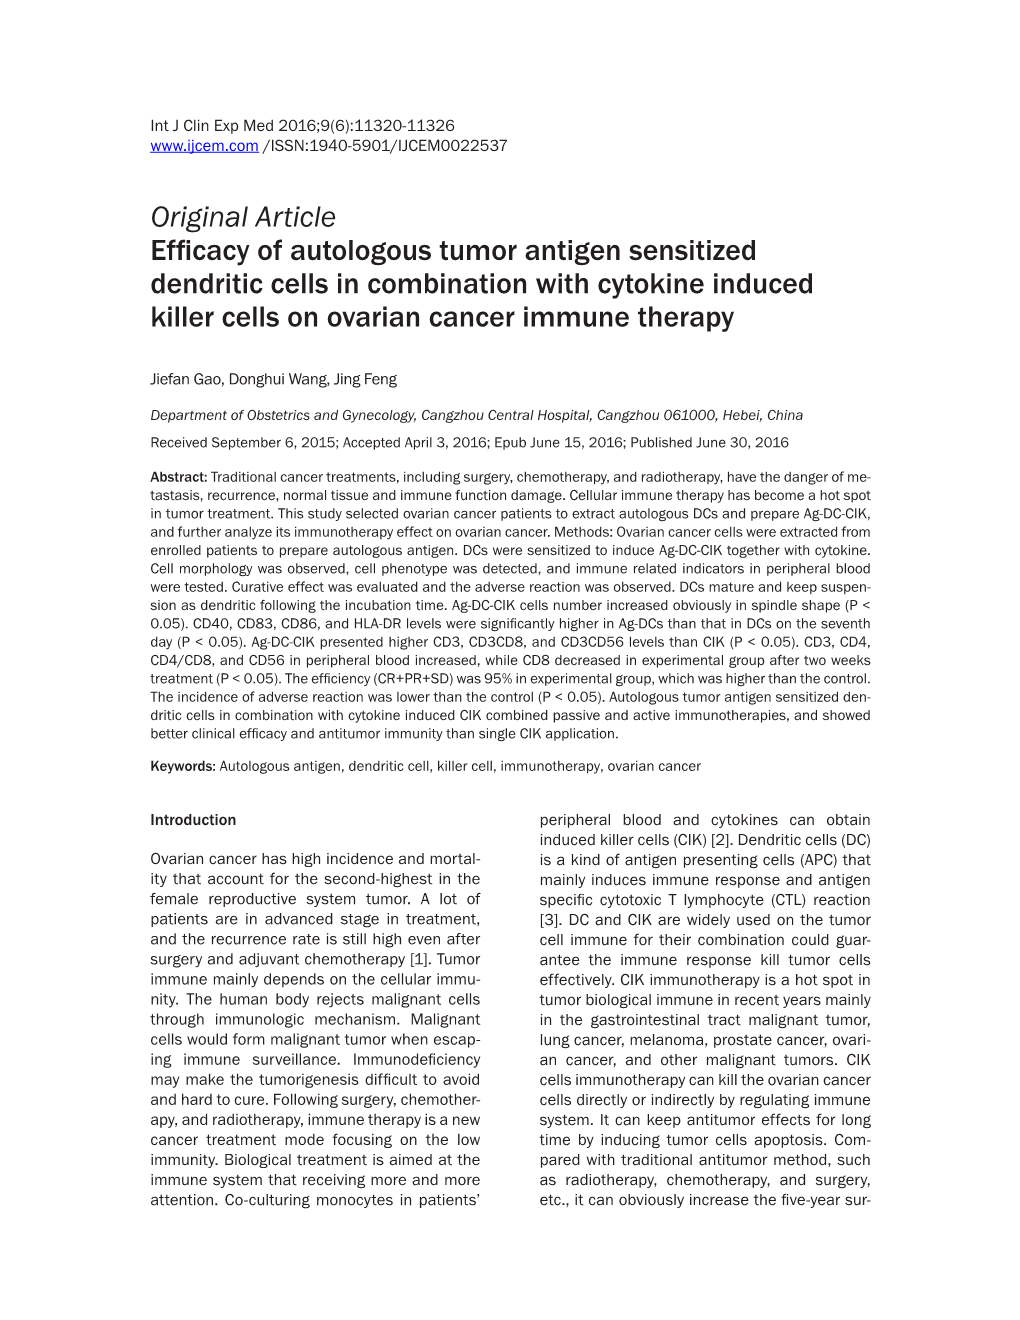 Original Article Efficacy of Autologous Tumor Antigen Sensitized Dendritic Cells in Combination with Cytokine Induced Killer Cells on Ovarian Cancer Immune Therapy